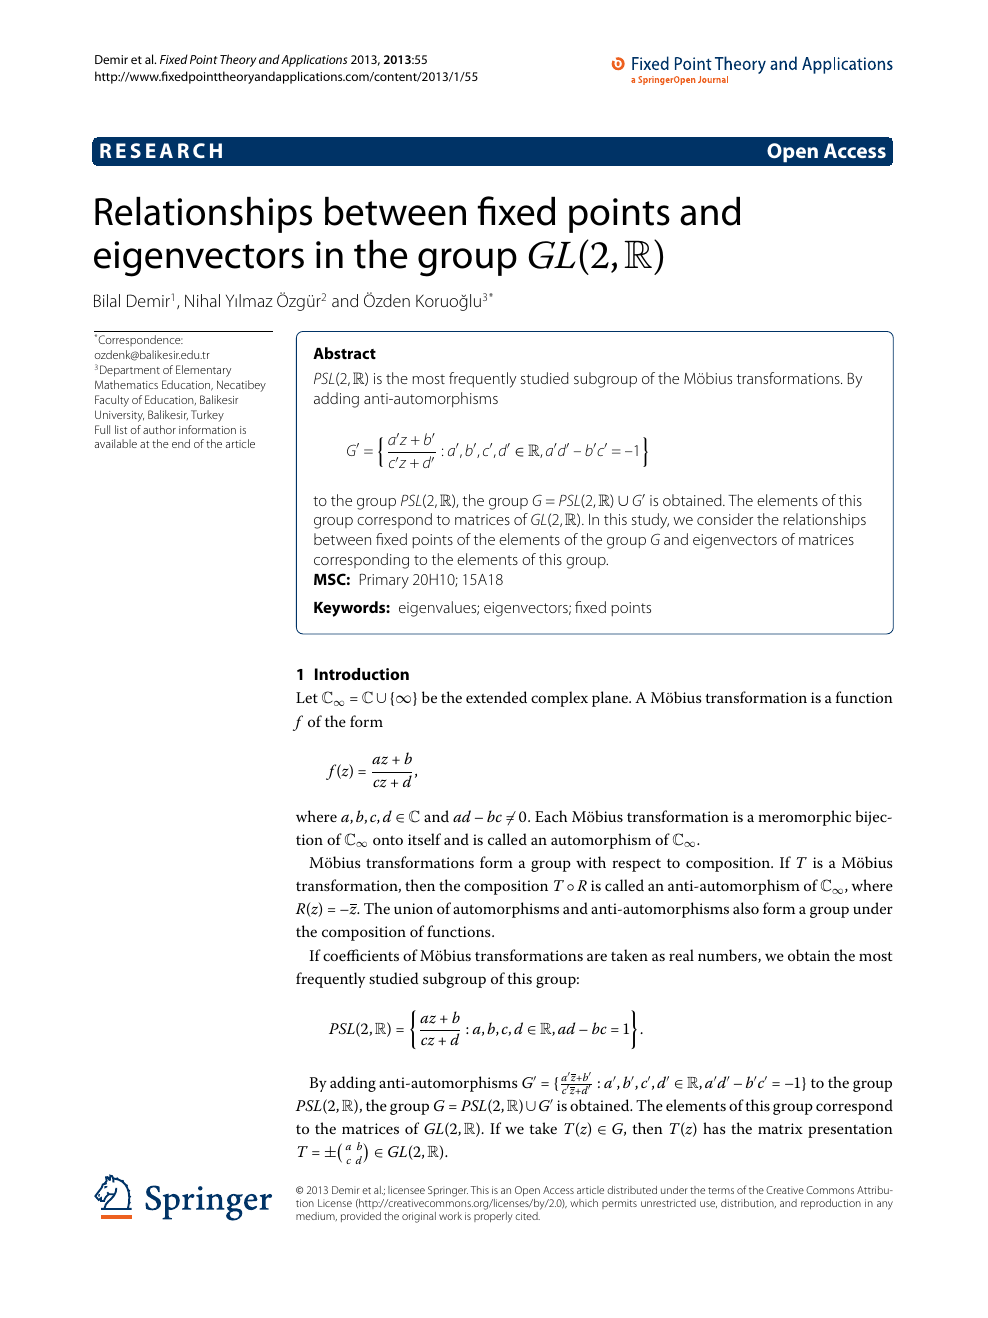 Relationships Between Fixed Points And Eigenvectors In The Group Gl 2 R Topic Of Research Paper In Mathematics Download Scholarly Article Pdf And Read For Free On Cyberleninka Open Science Hub